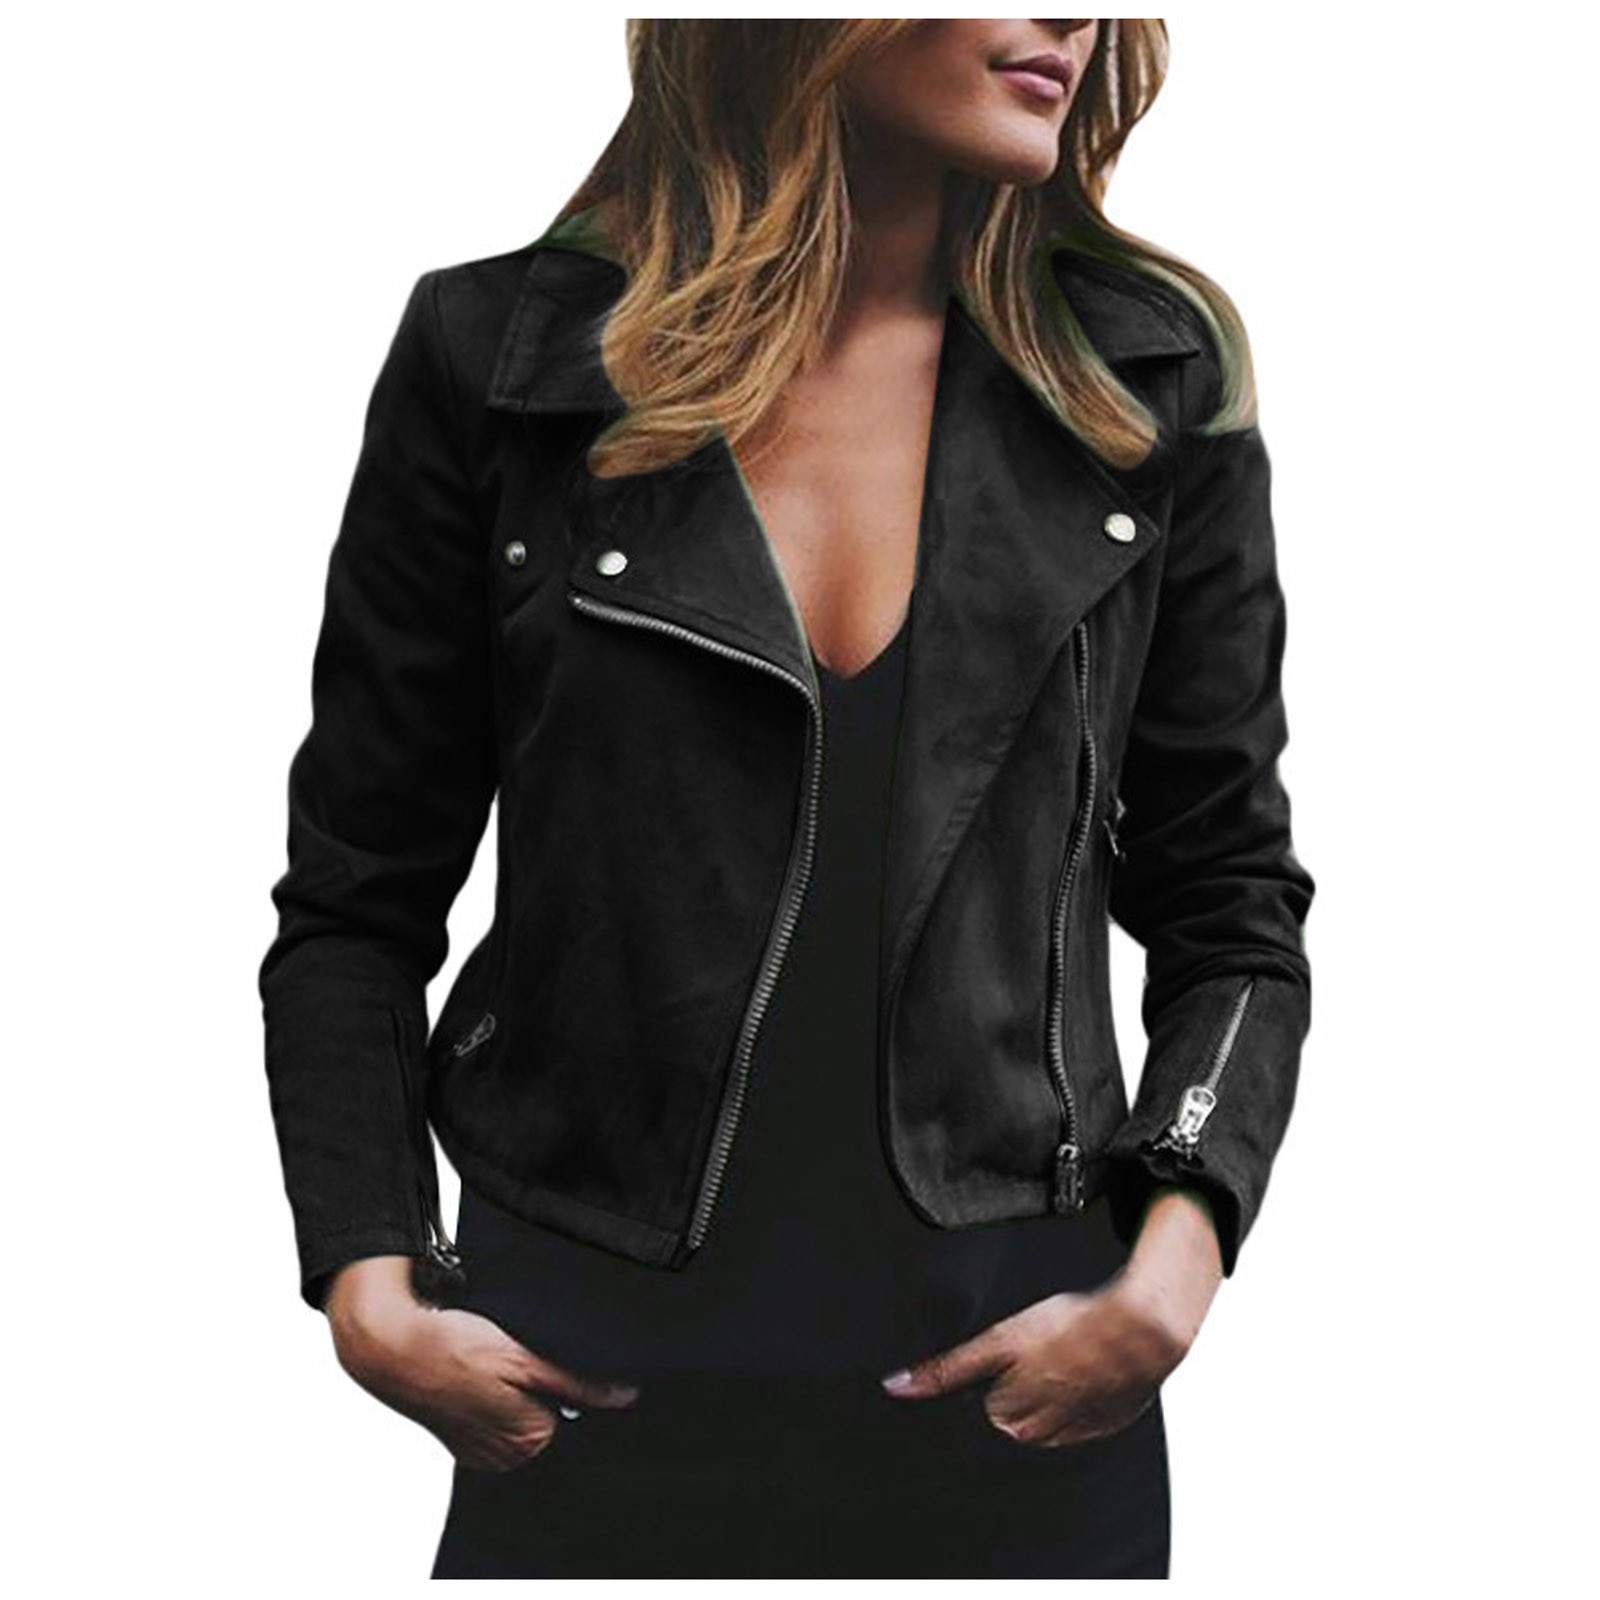 Plus Size Faux Leather Jackets for Women,Womens Fall Winter Long Sleeve Zip Motorcycle Jacket Solid Cool Outerwear - image 1 of 6